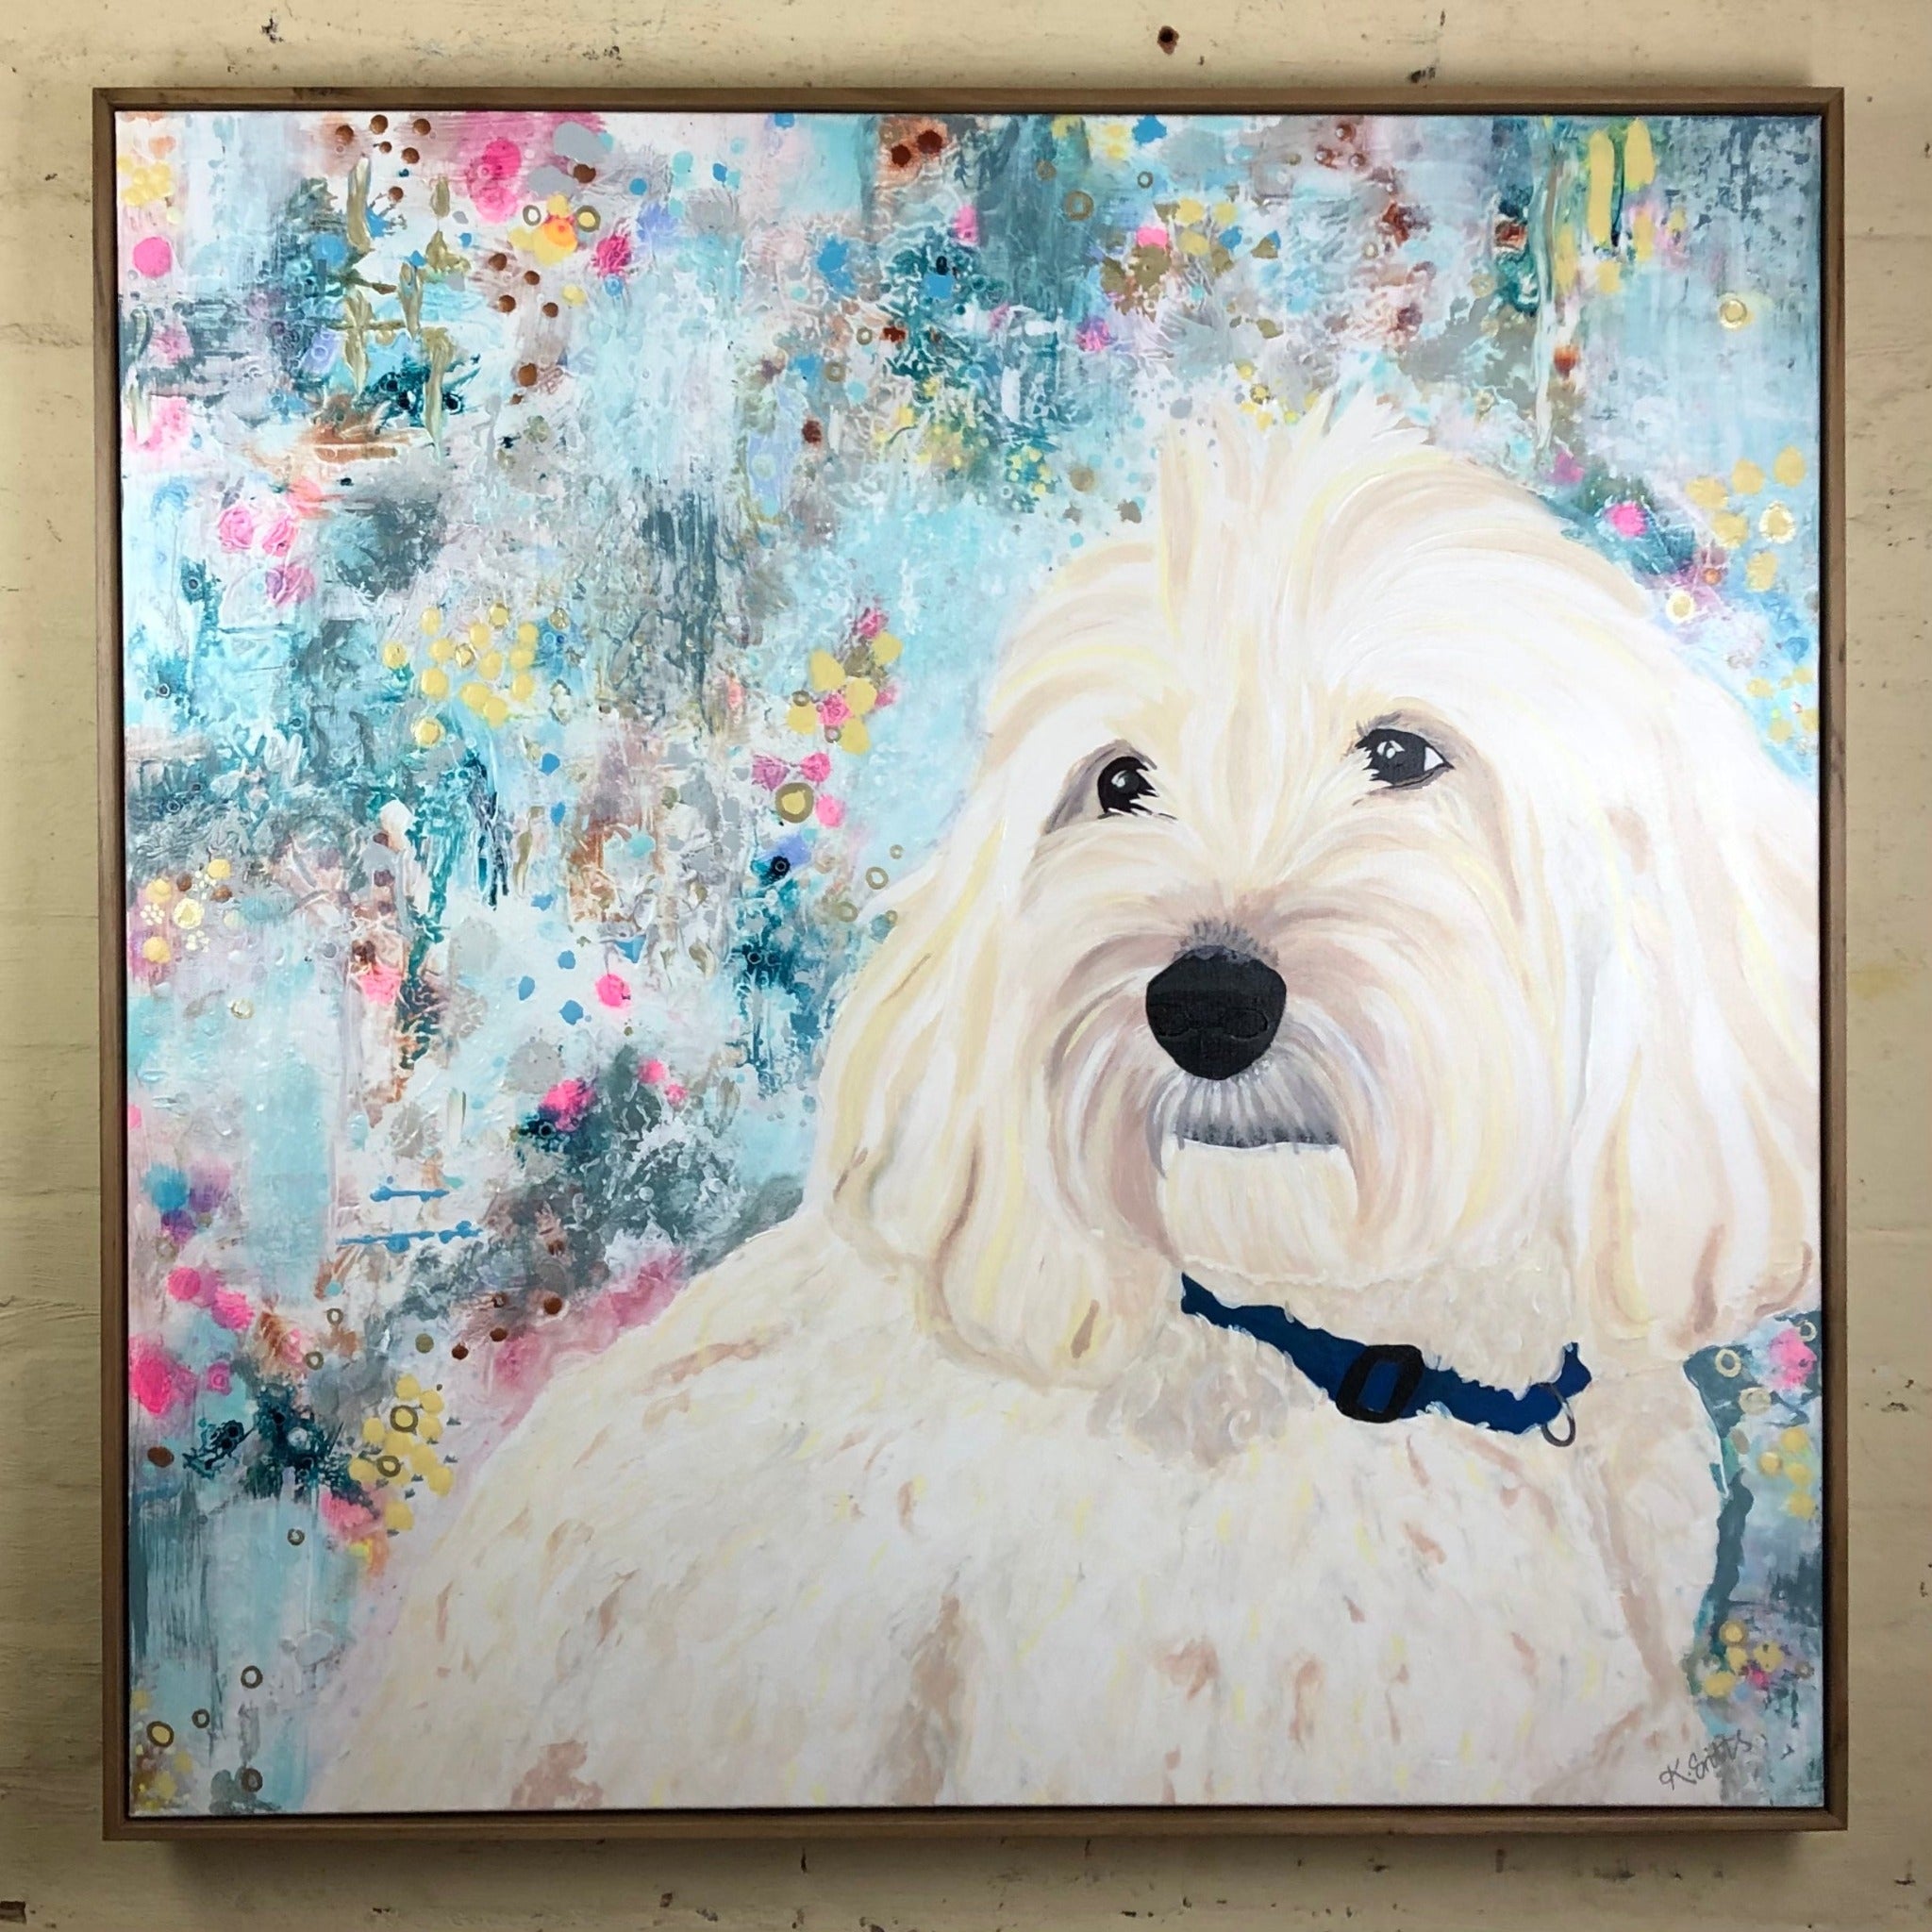 Kerry Evitts Art inside a Mulbury floating frame. Painting of a white puppy. 